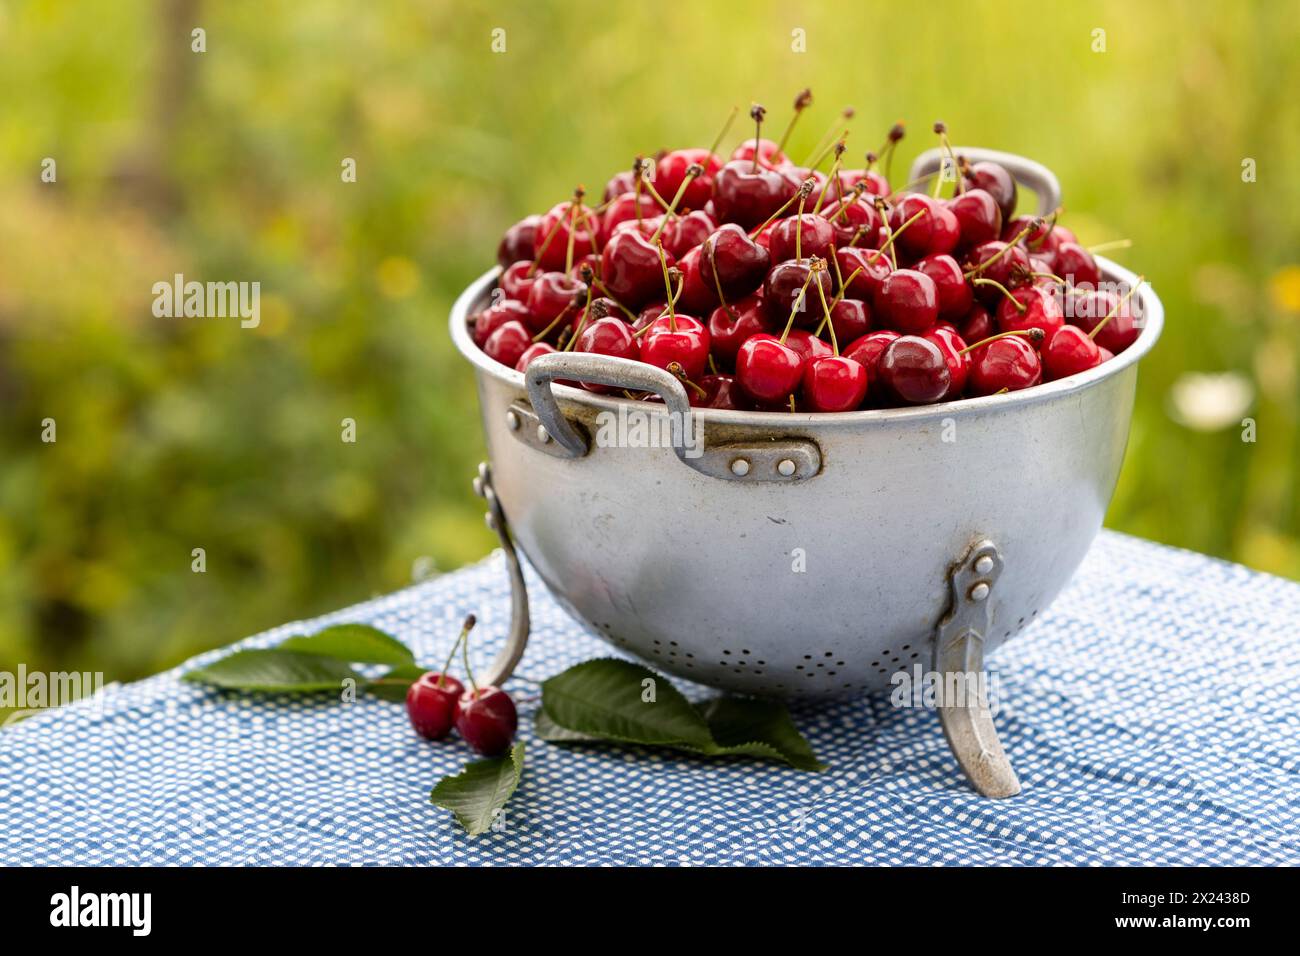 Red cherries in a metal sieve Stock Photo